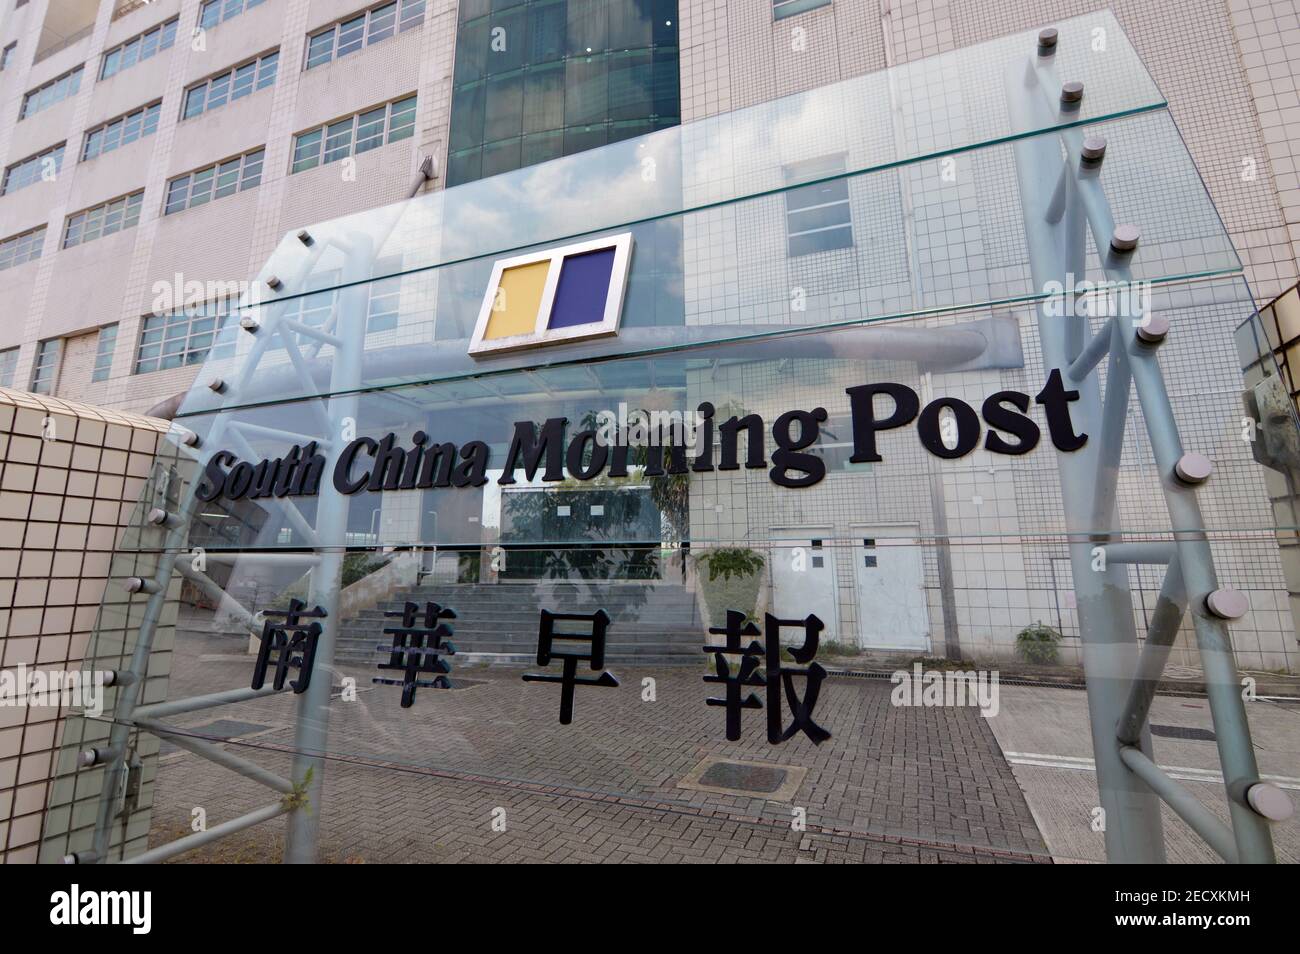 SCMP (南華早報) signage at headquarters of South China Morning Post Publishers Limited, Tai Po Industrial Estate (大埔工業邨), Hong Kong Stock Photo